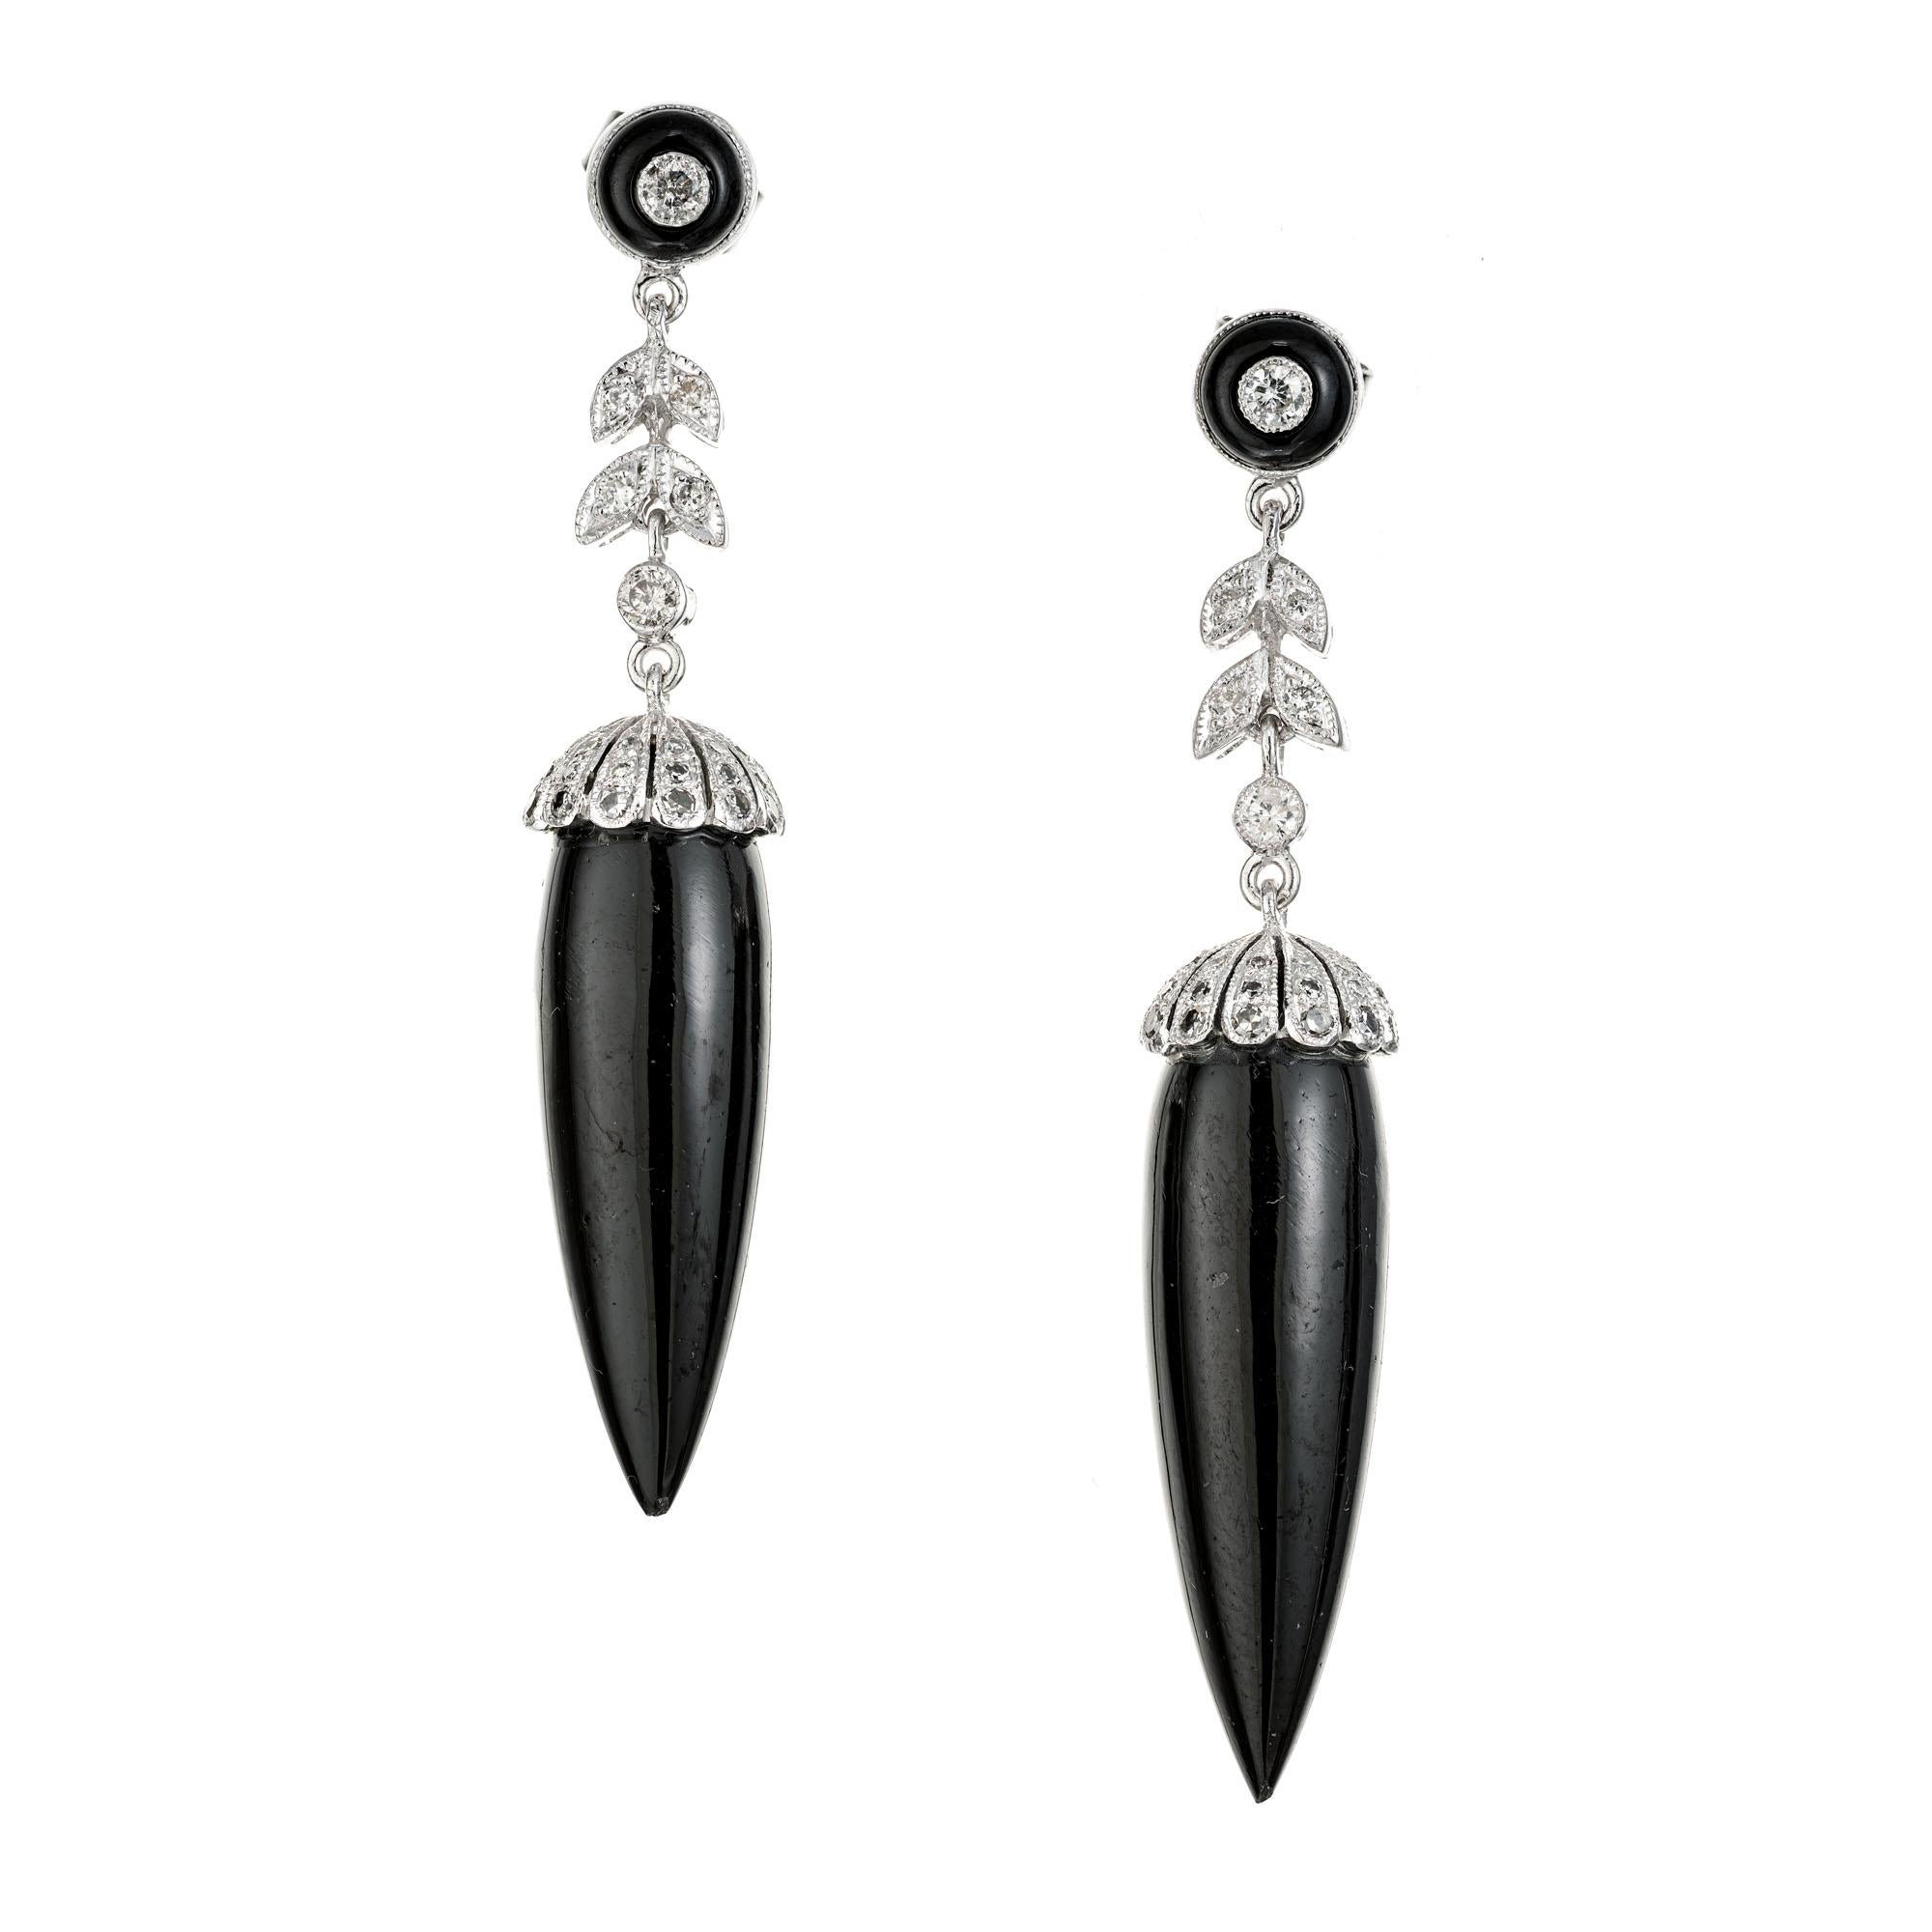 Roaring 1920's Art Deco onyx and diamond dangle earrings. 2 onyx dangles with 84 round brilliant cut accent diamonds and 2 onyx halos in 14k white gold.

84 round brilliant diamonds, H-I I approx. .50cts
2 black onyx drops, 2.8mm x 8.5mm
2 black